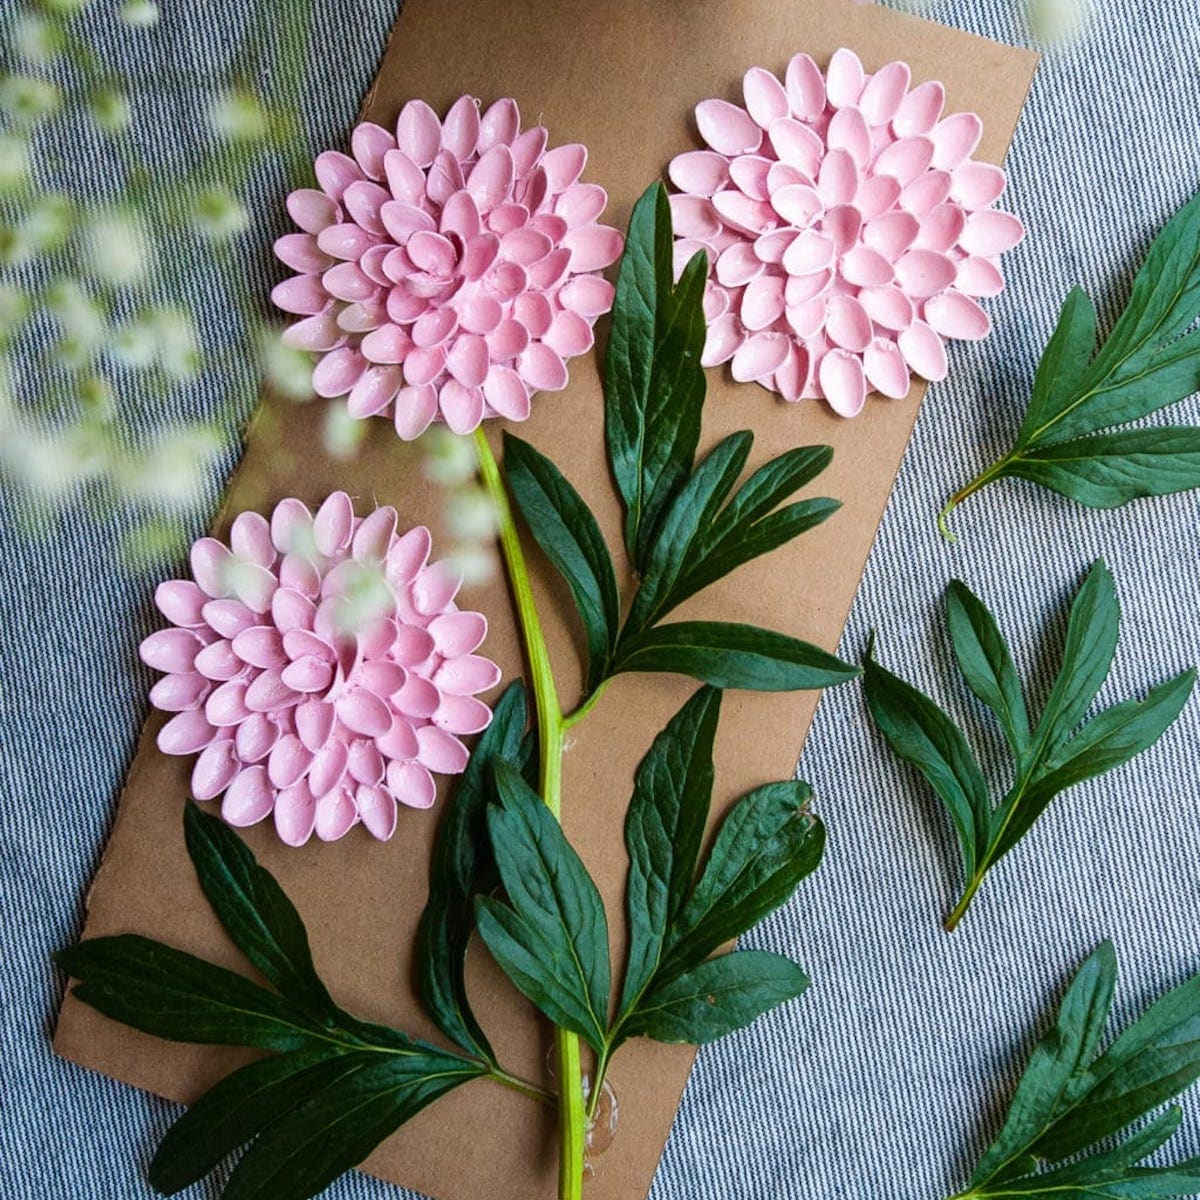 17 spring crafts for kids of all ages